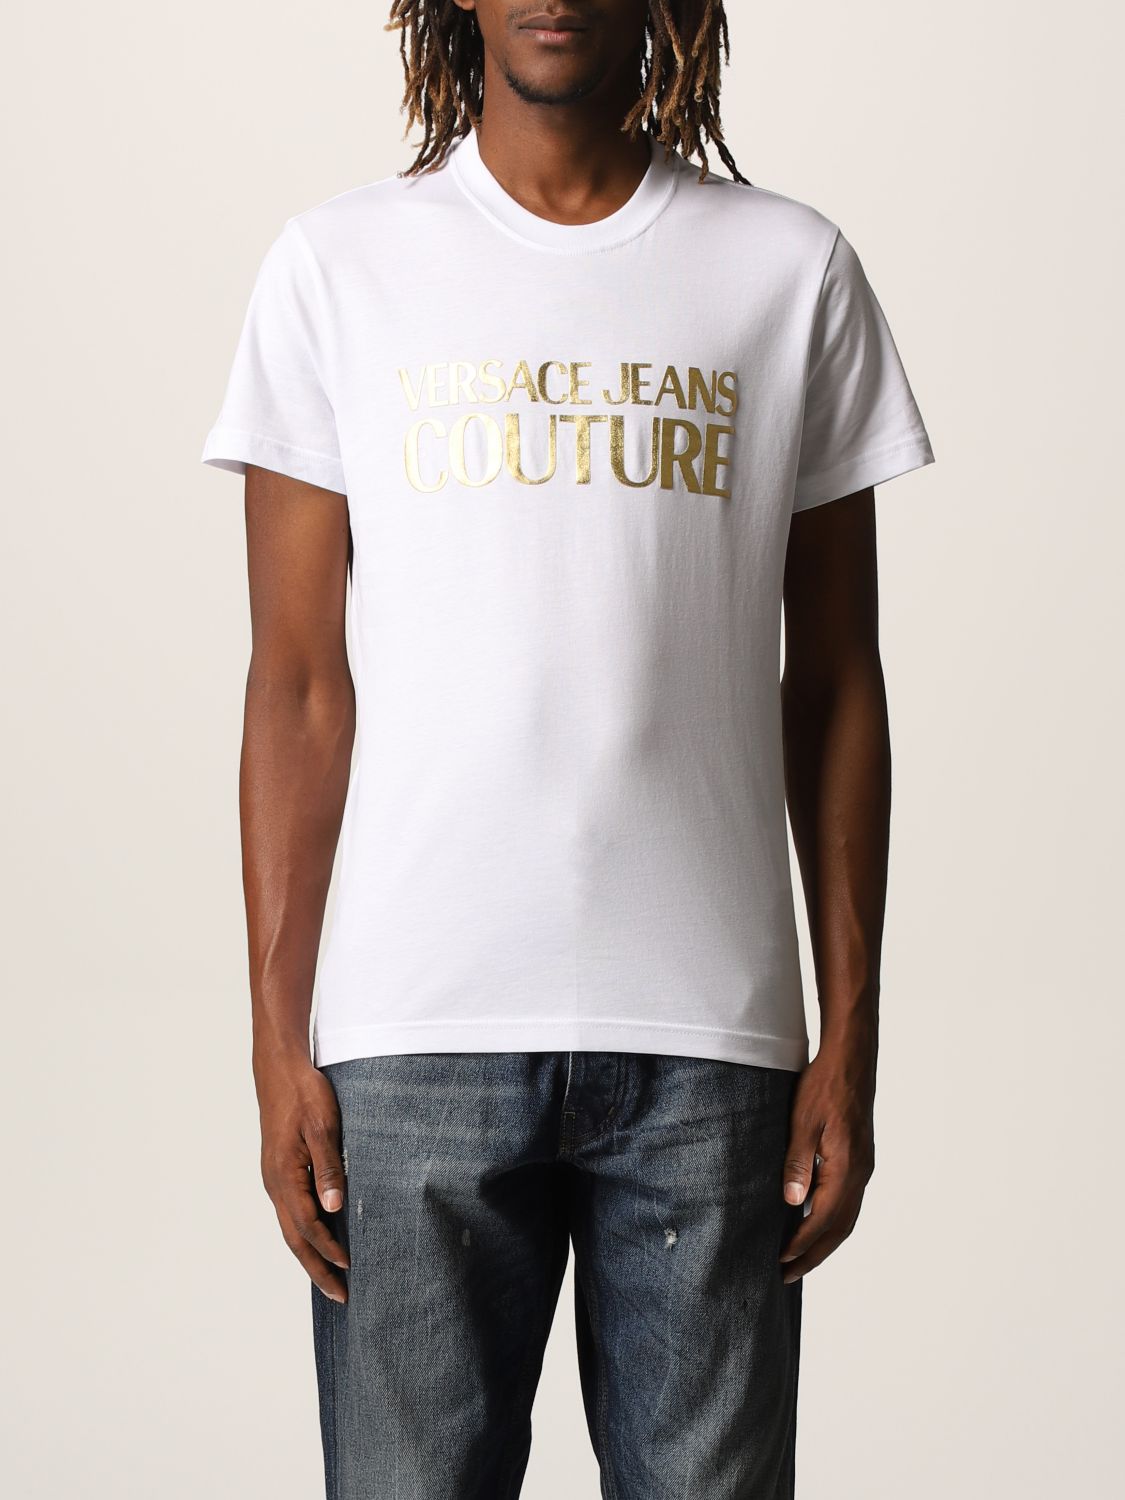 VERSACE JEANS COUTURE: T-shirt with laminated logo - White | Versace ...